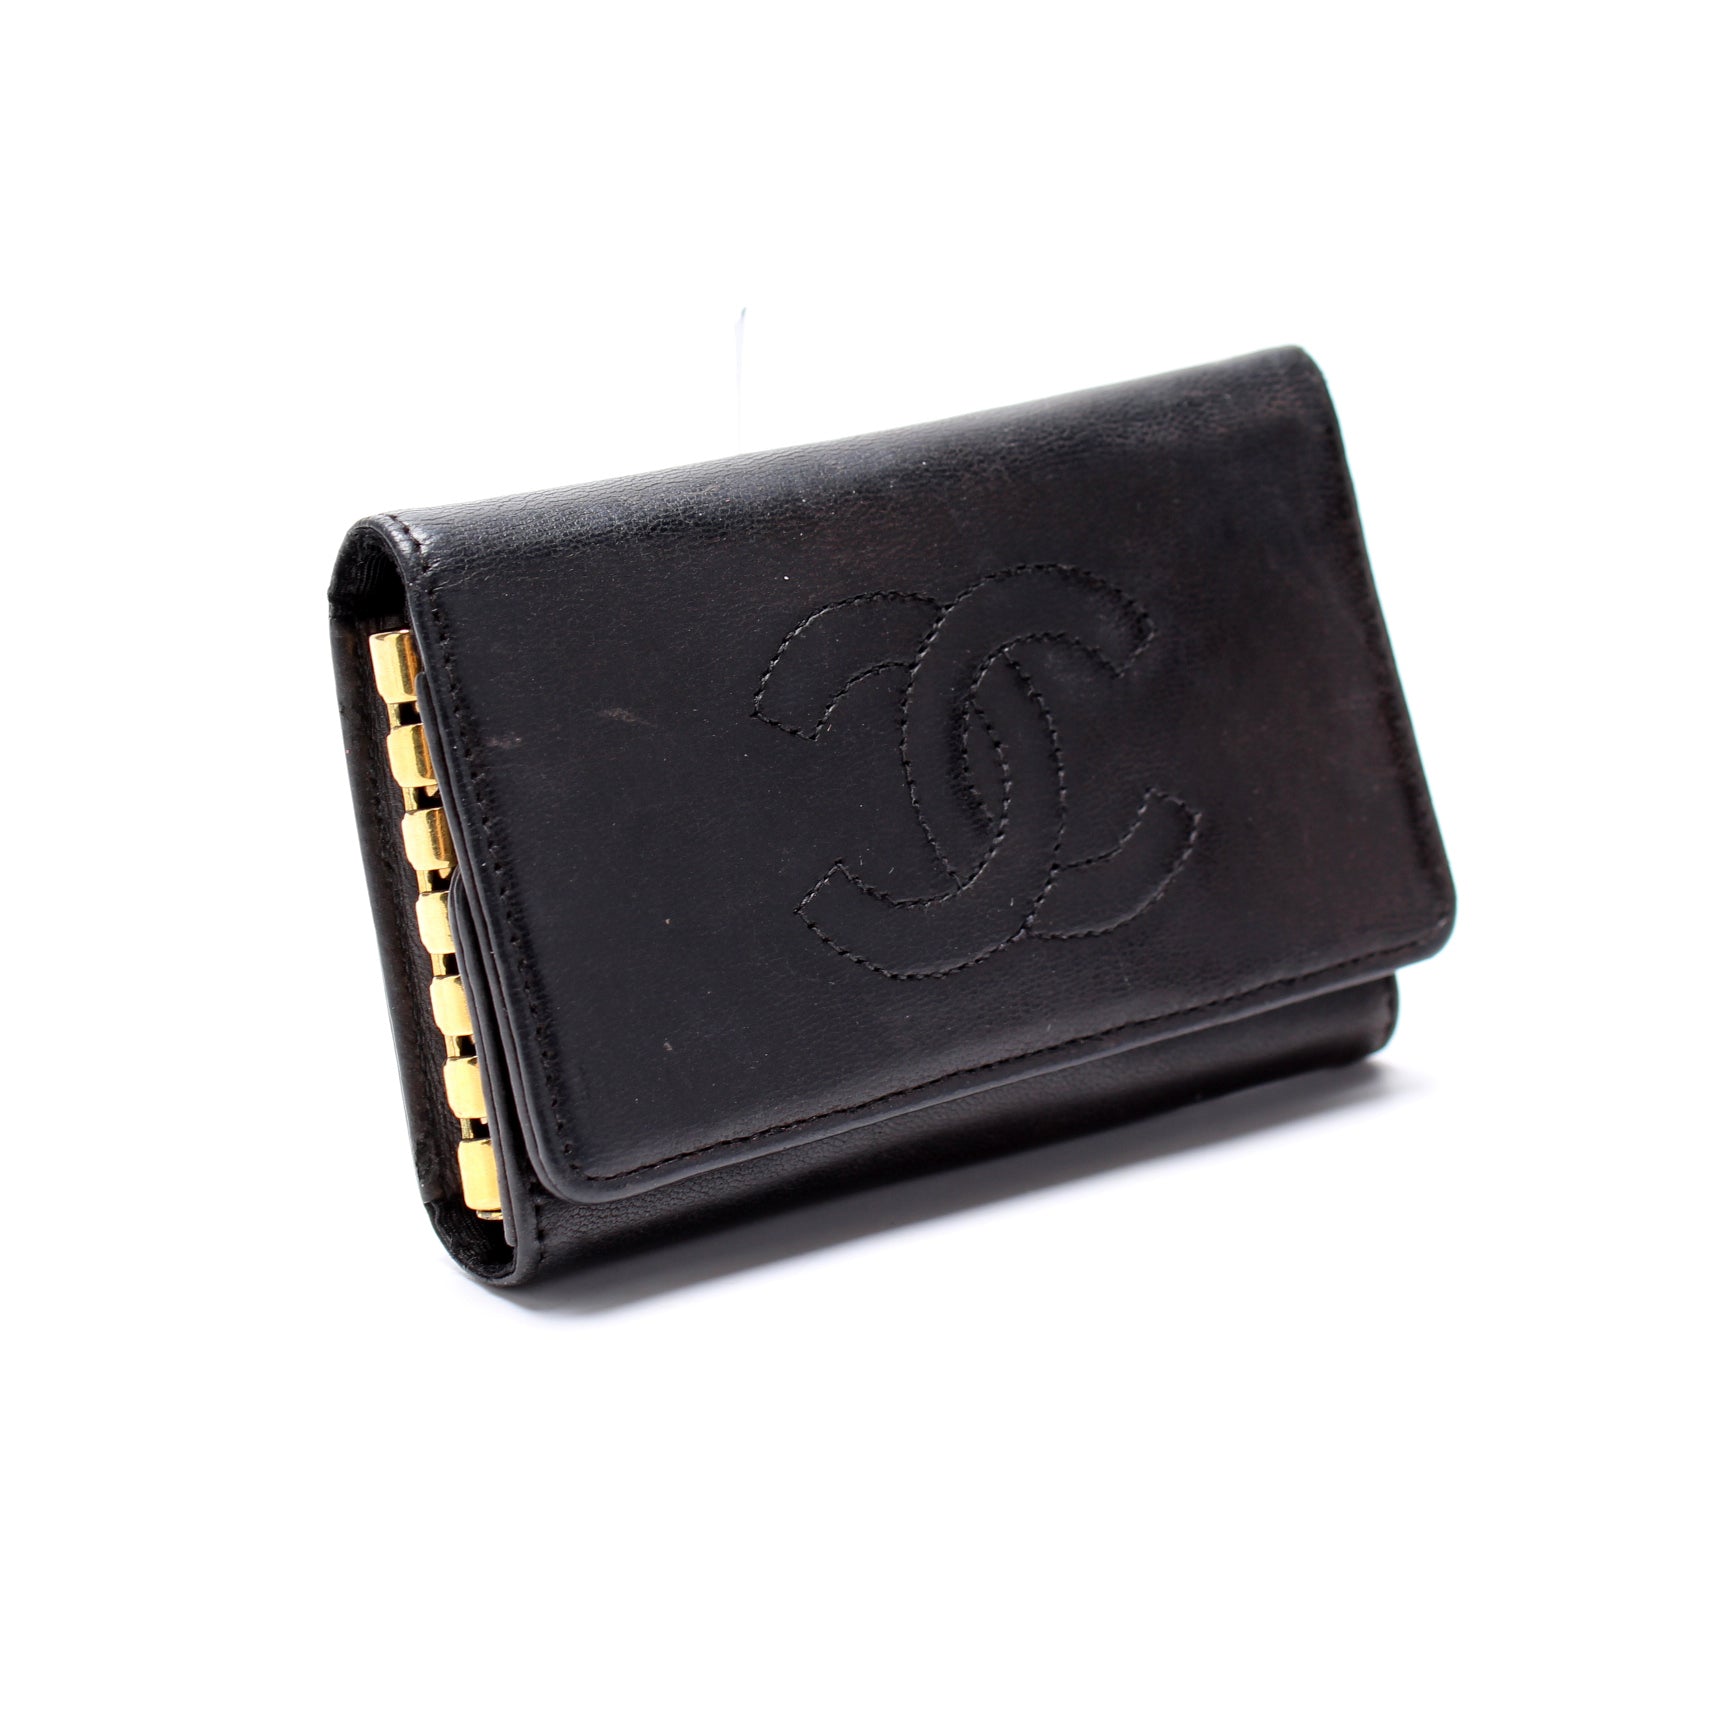 CHANEL Caviar Quilted 6 Key Holder Black 97790